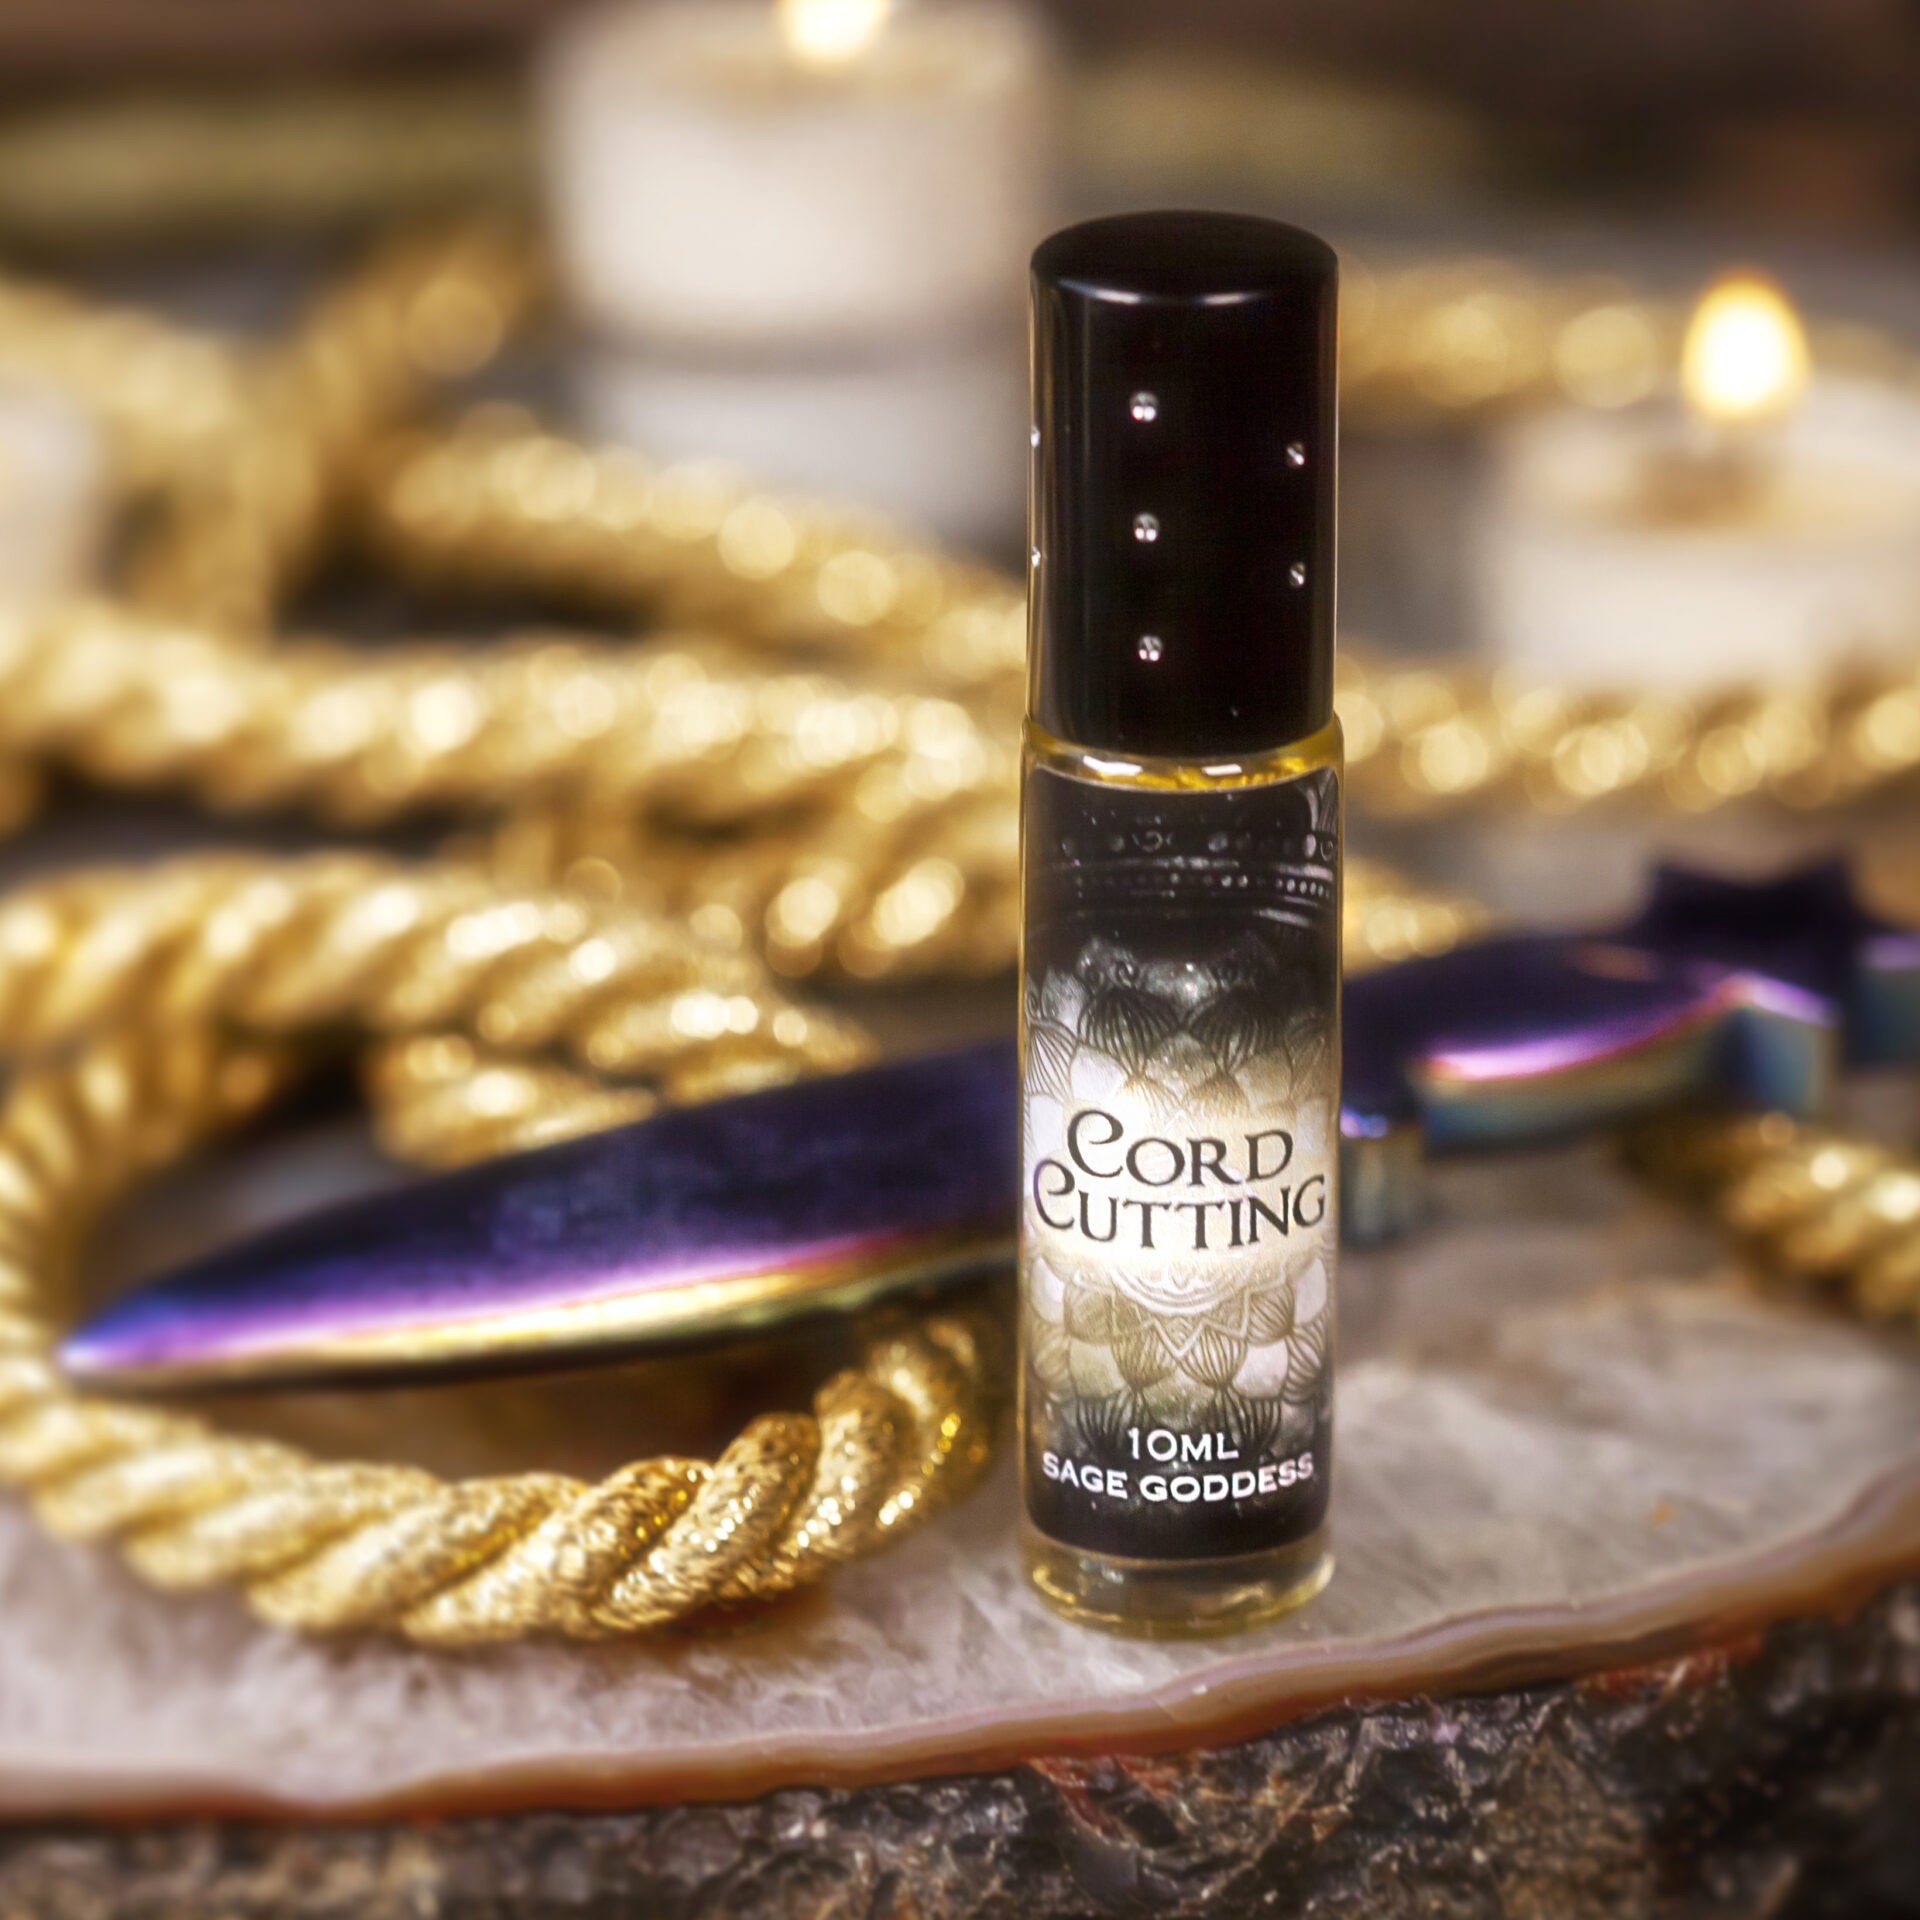 Patchouli Essential Oil at the Dreaming Goddess